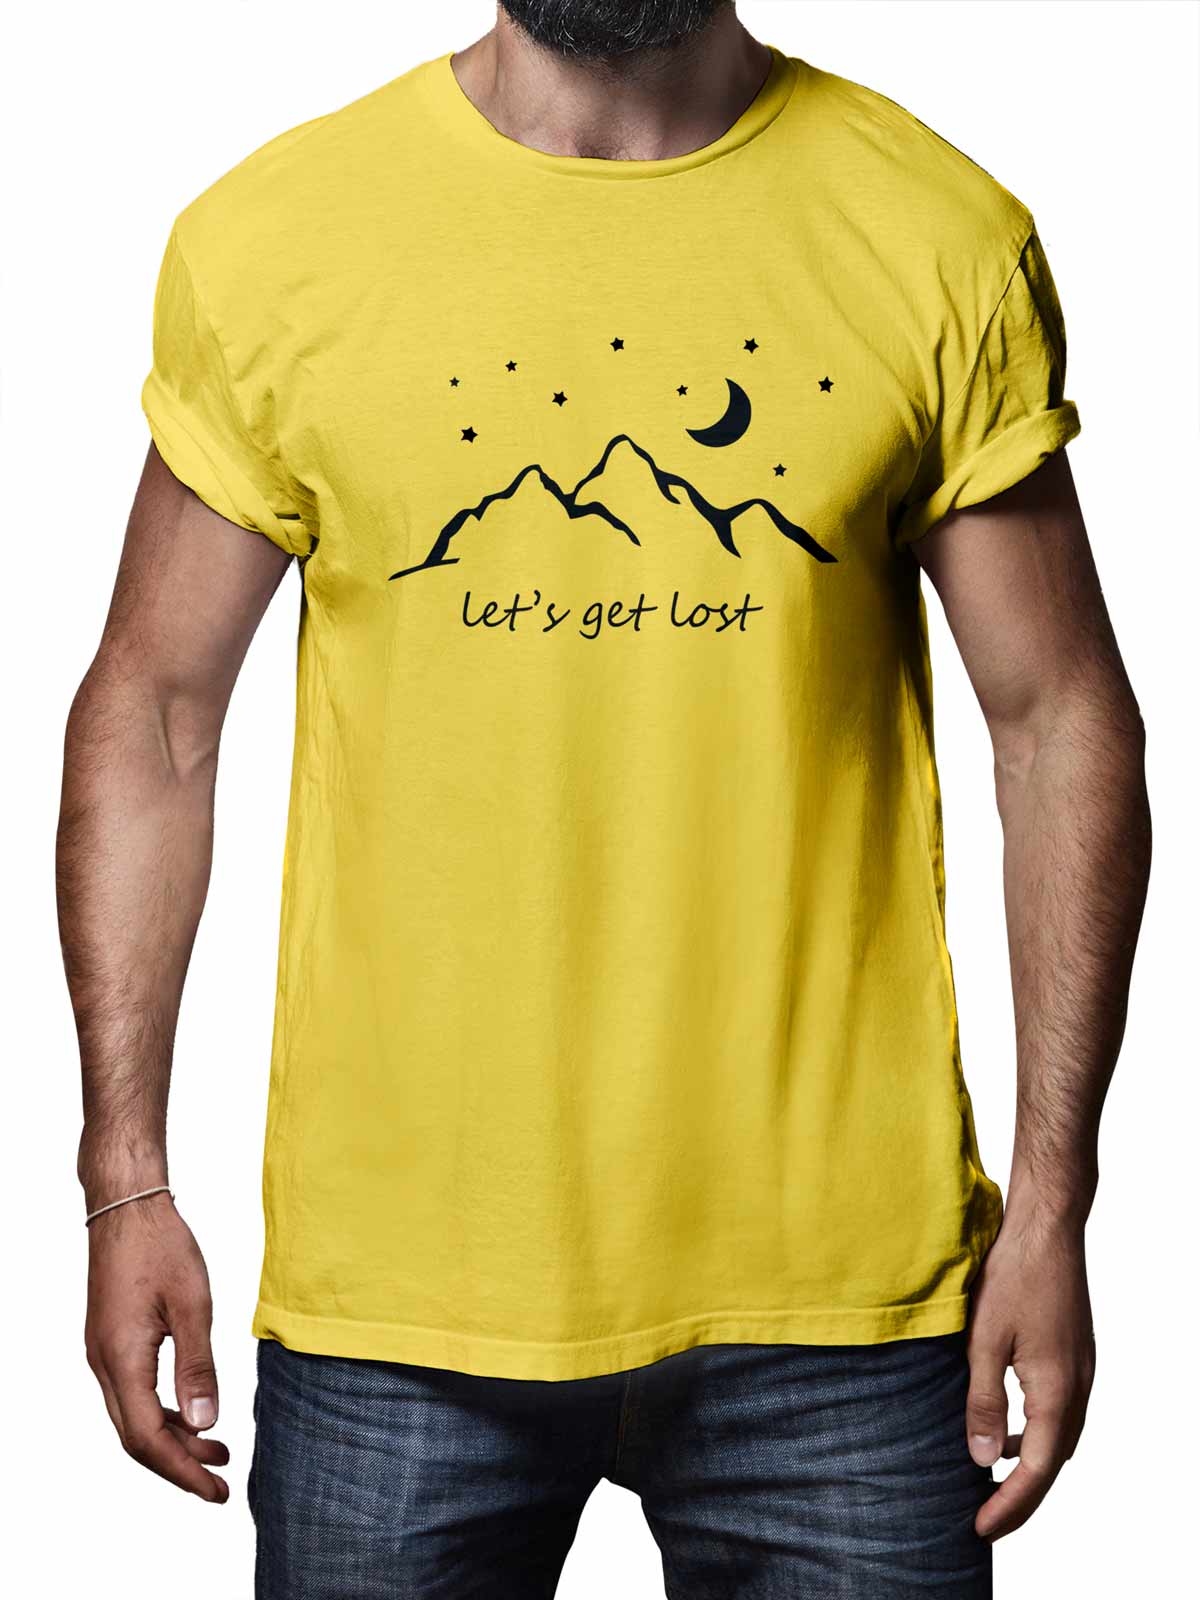 Lets-get-lost-printed-t-shirt-for-men by Ghumakkad